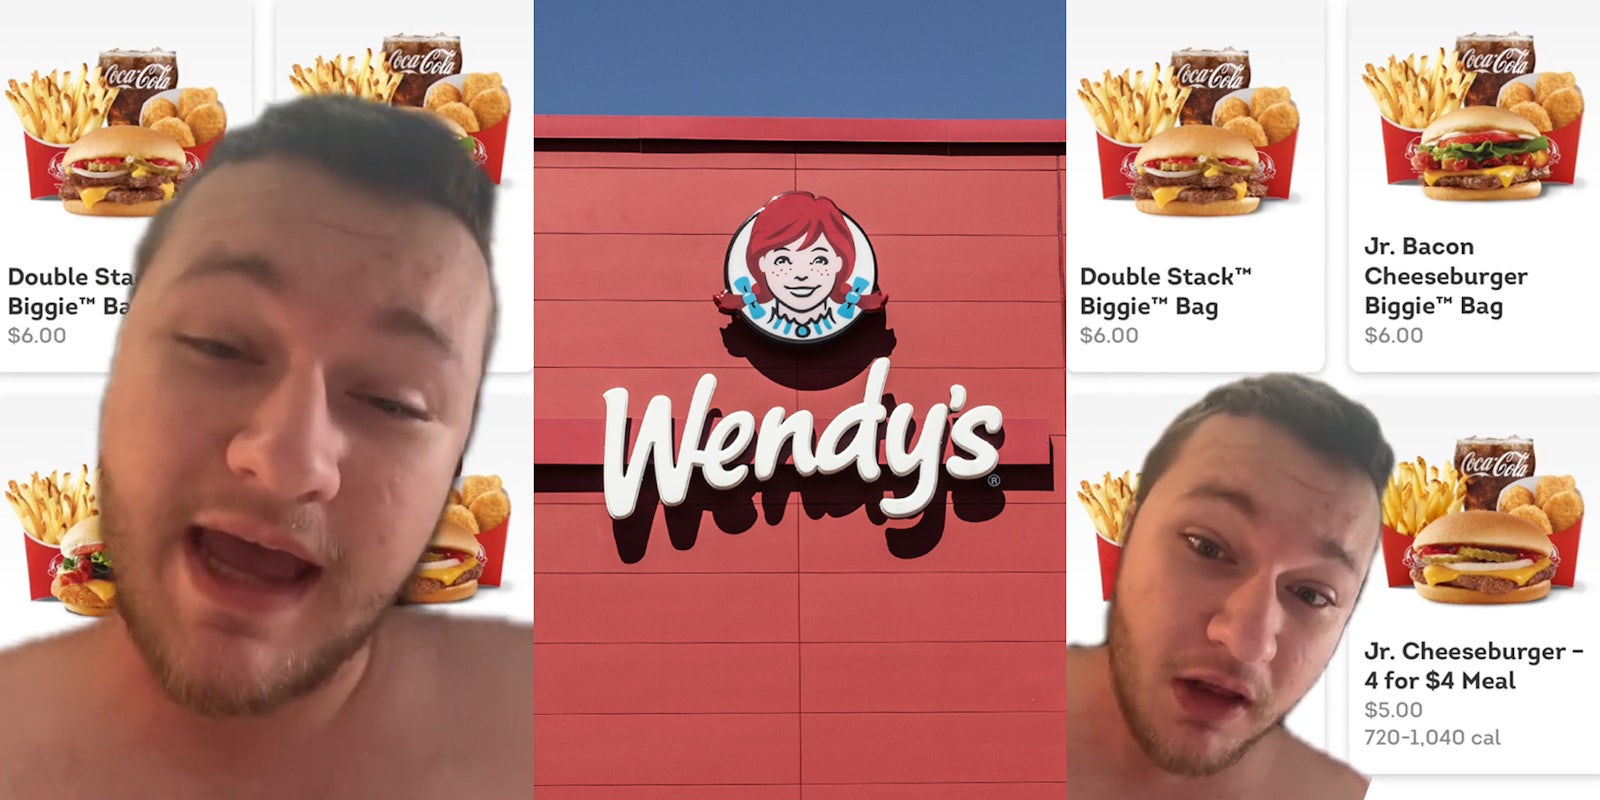 Man greenscreen TikTok over Wendy's menu (l) Wendy's sign on building with blue sky (c) Man greenscreen TikTok over Wendy's menu 4 for $4 priced at $5 (r)